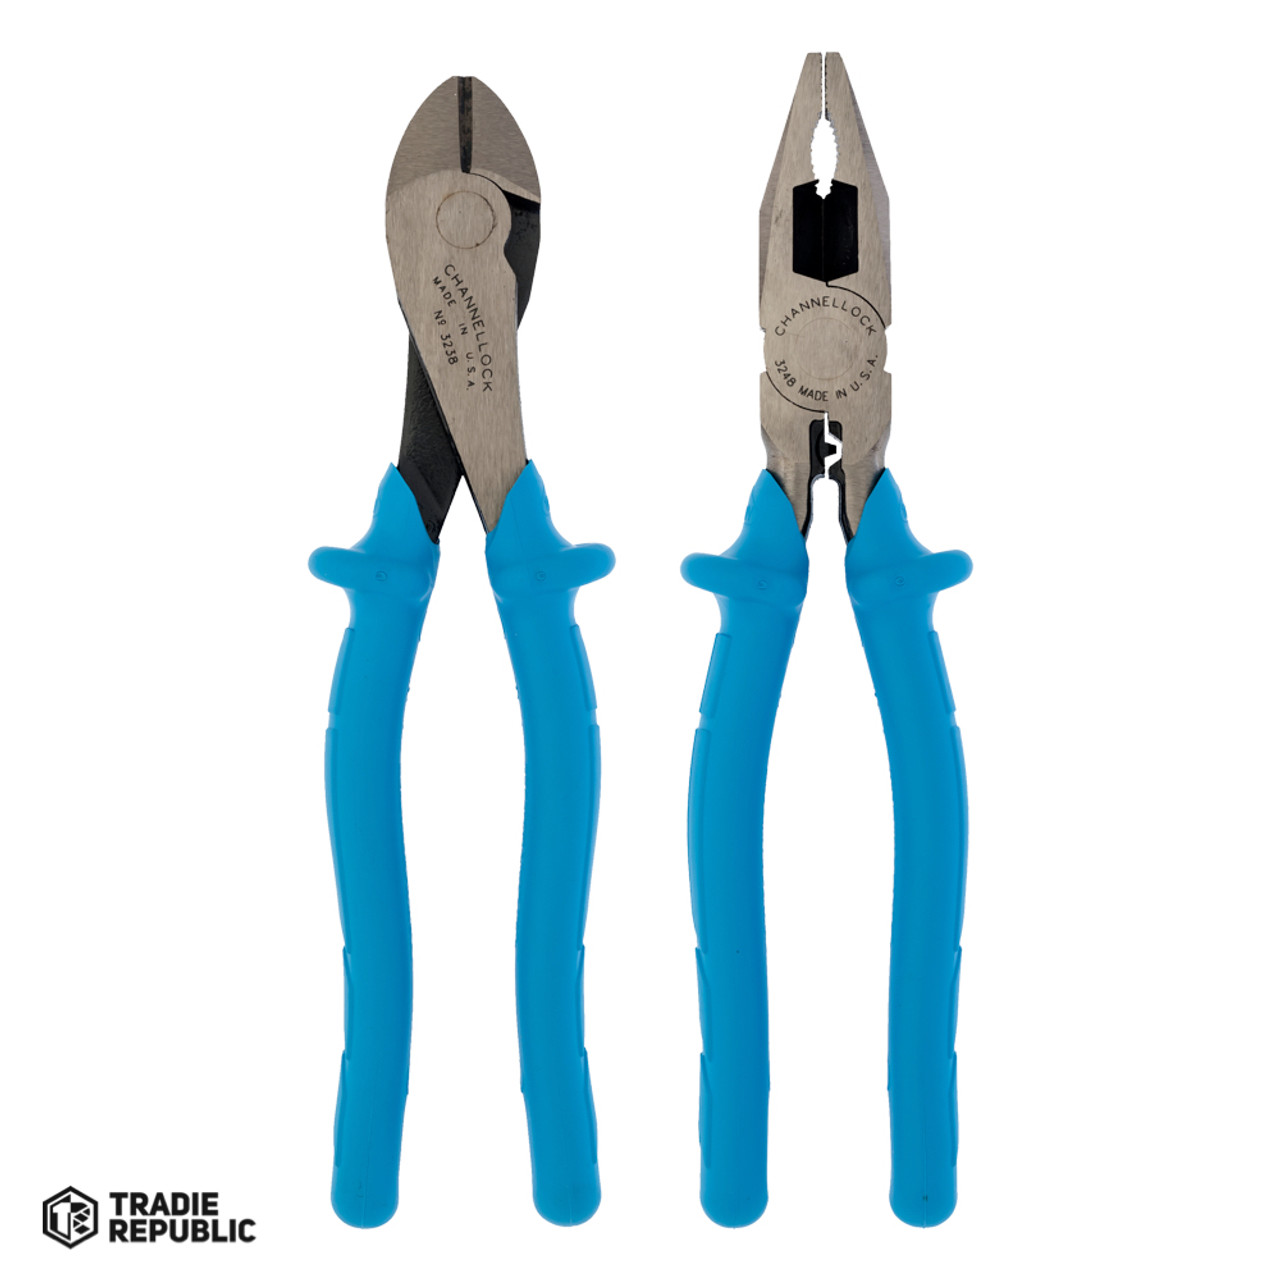 CHPG2 Channellock Linesman and Diagonal Cutting Plier Set